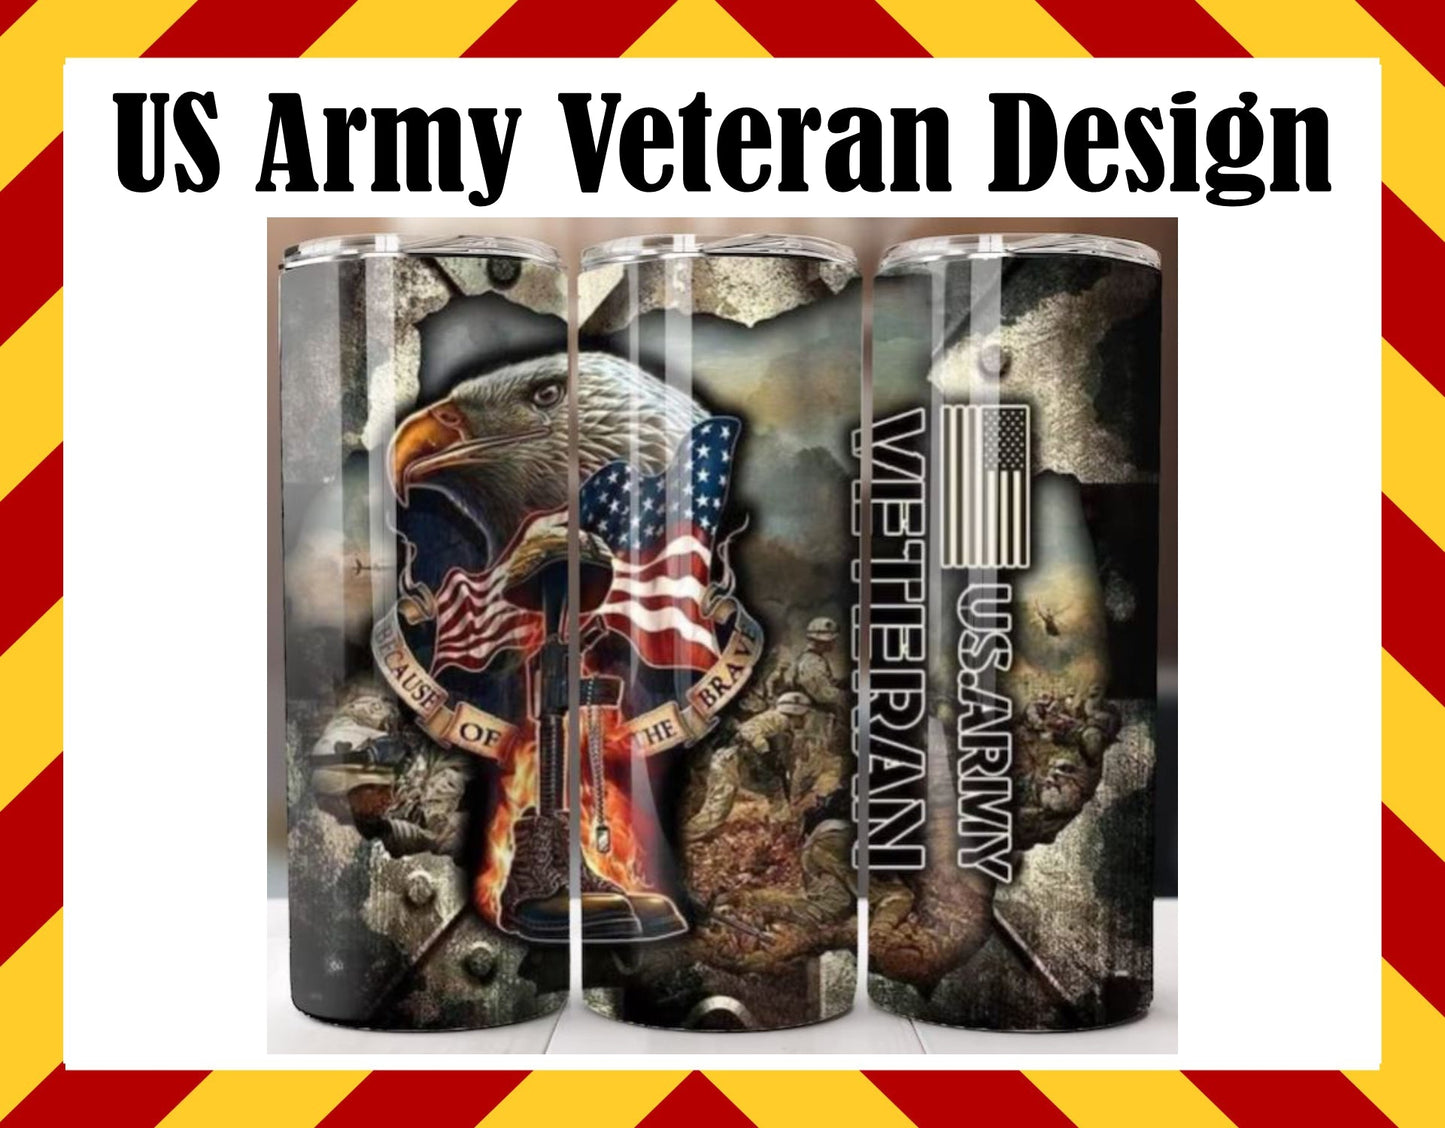 Stainless Steel Cup - ARMY DESIGNS